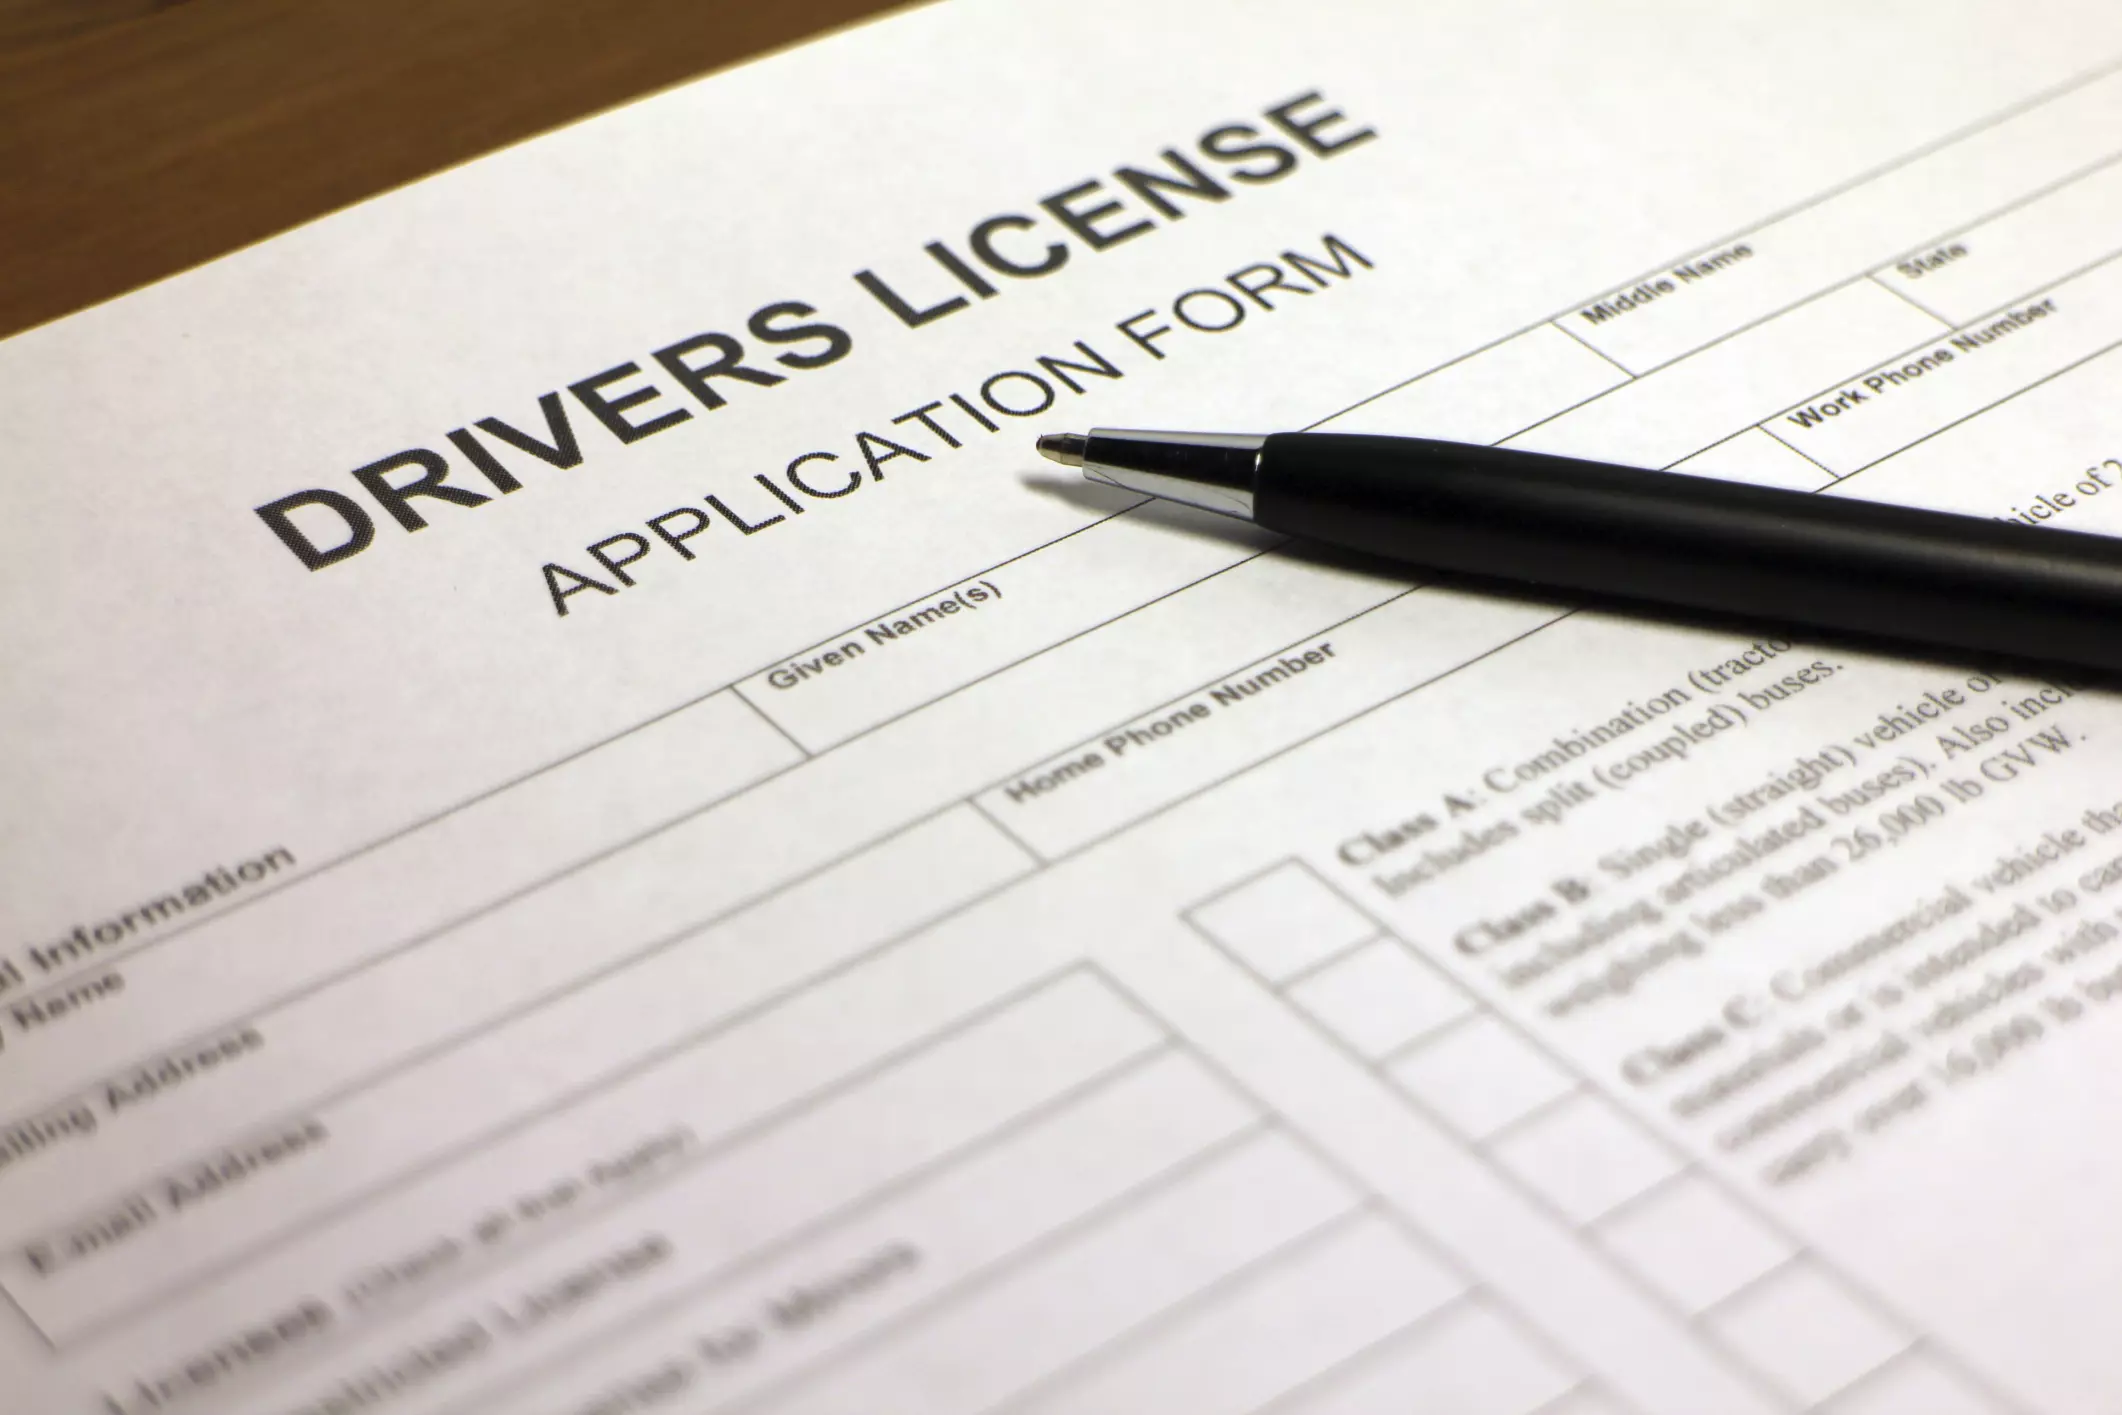 New Wisconsin driver's license adds security features